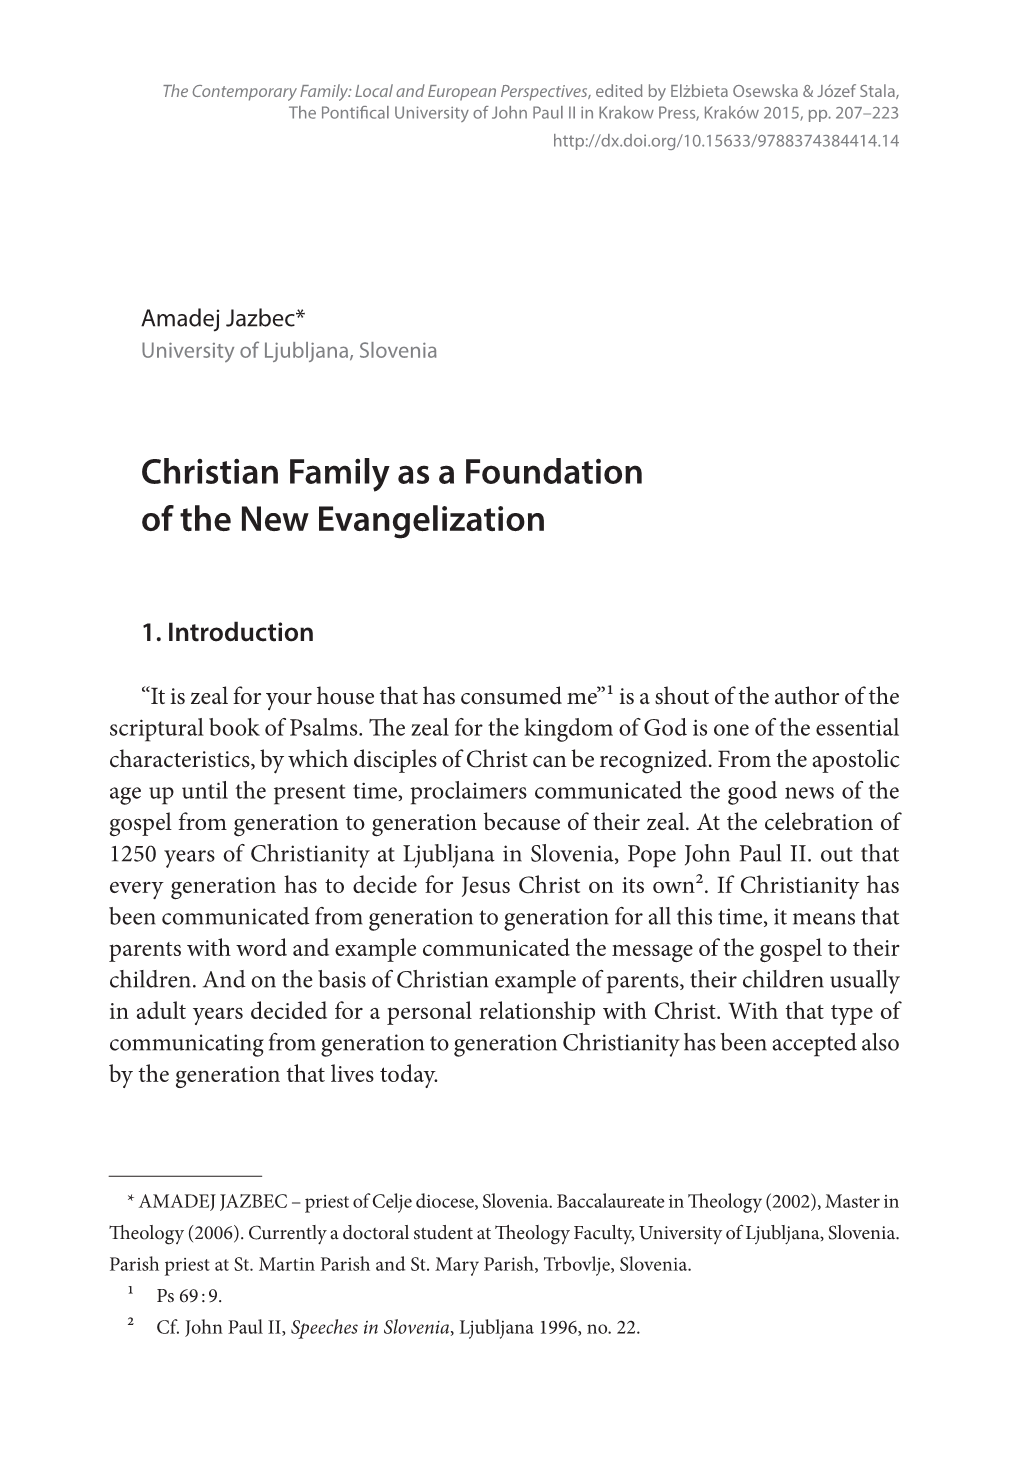 Christian Family As a Foundation of the New Evangelization